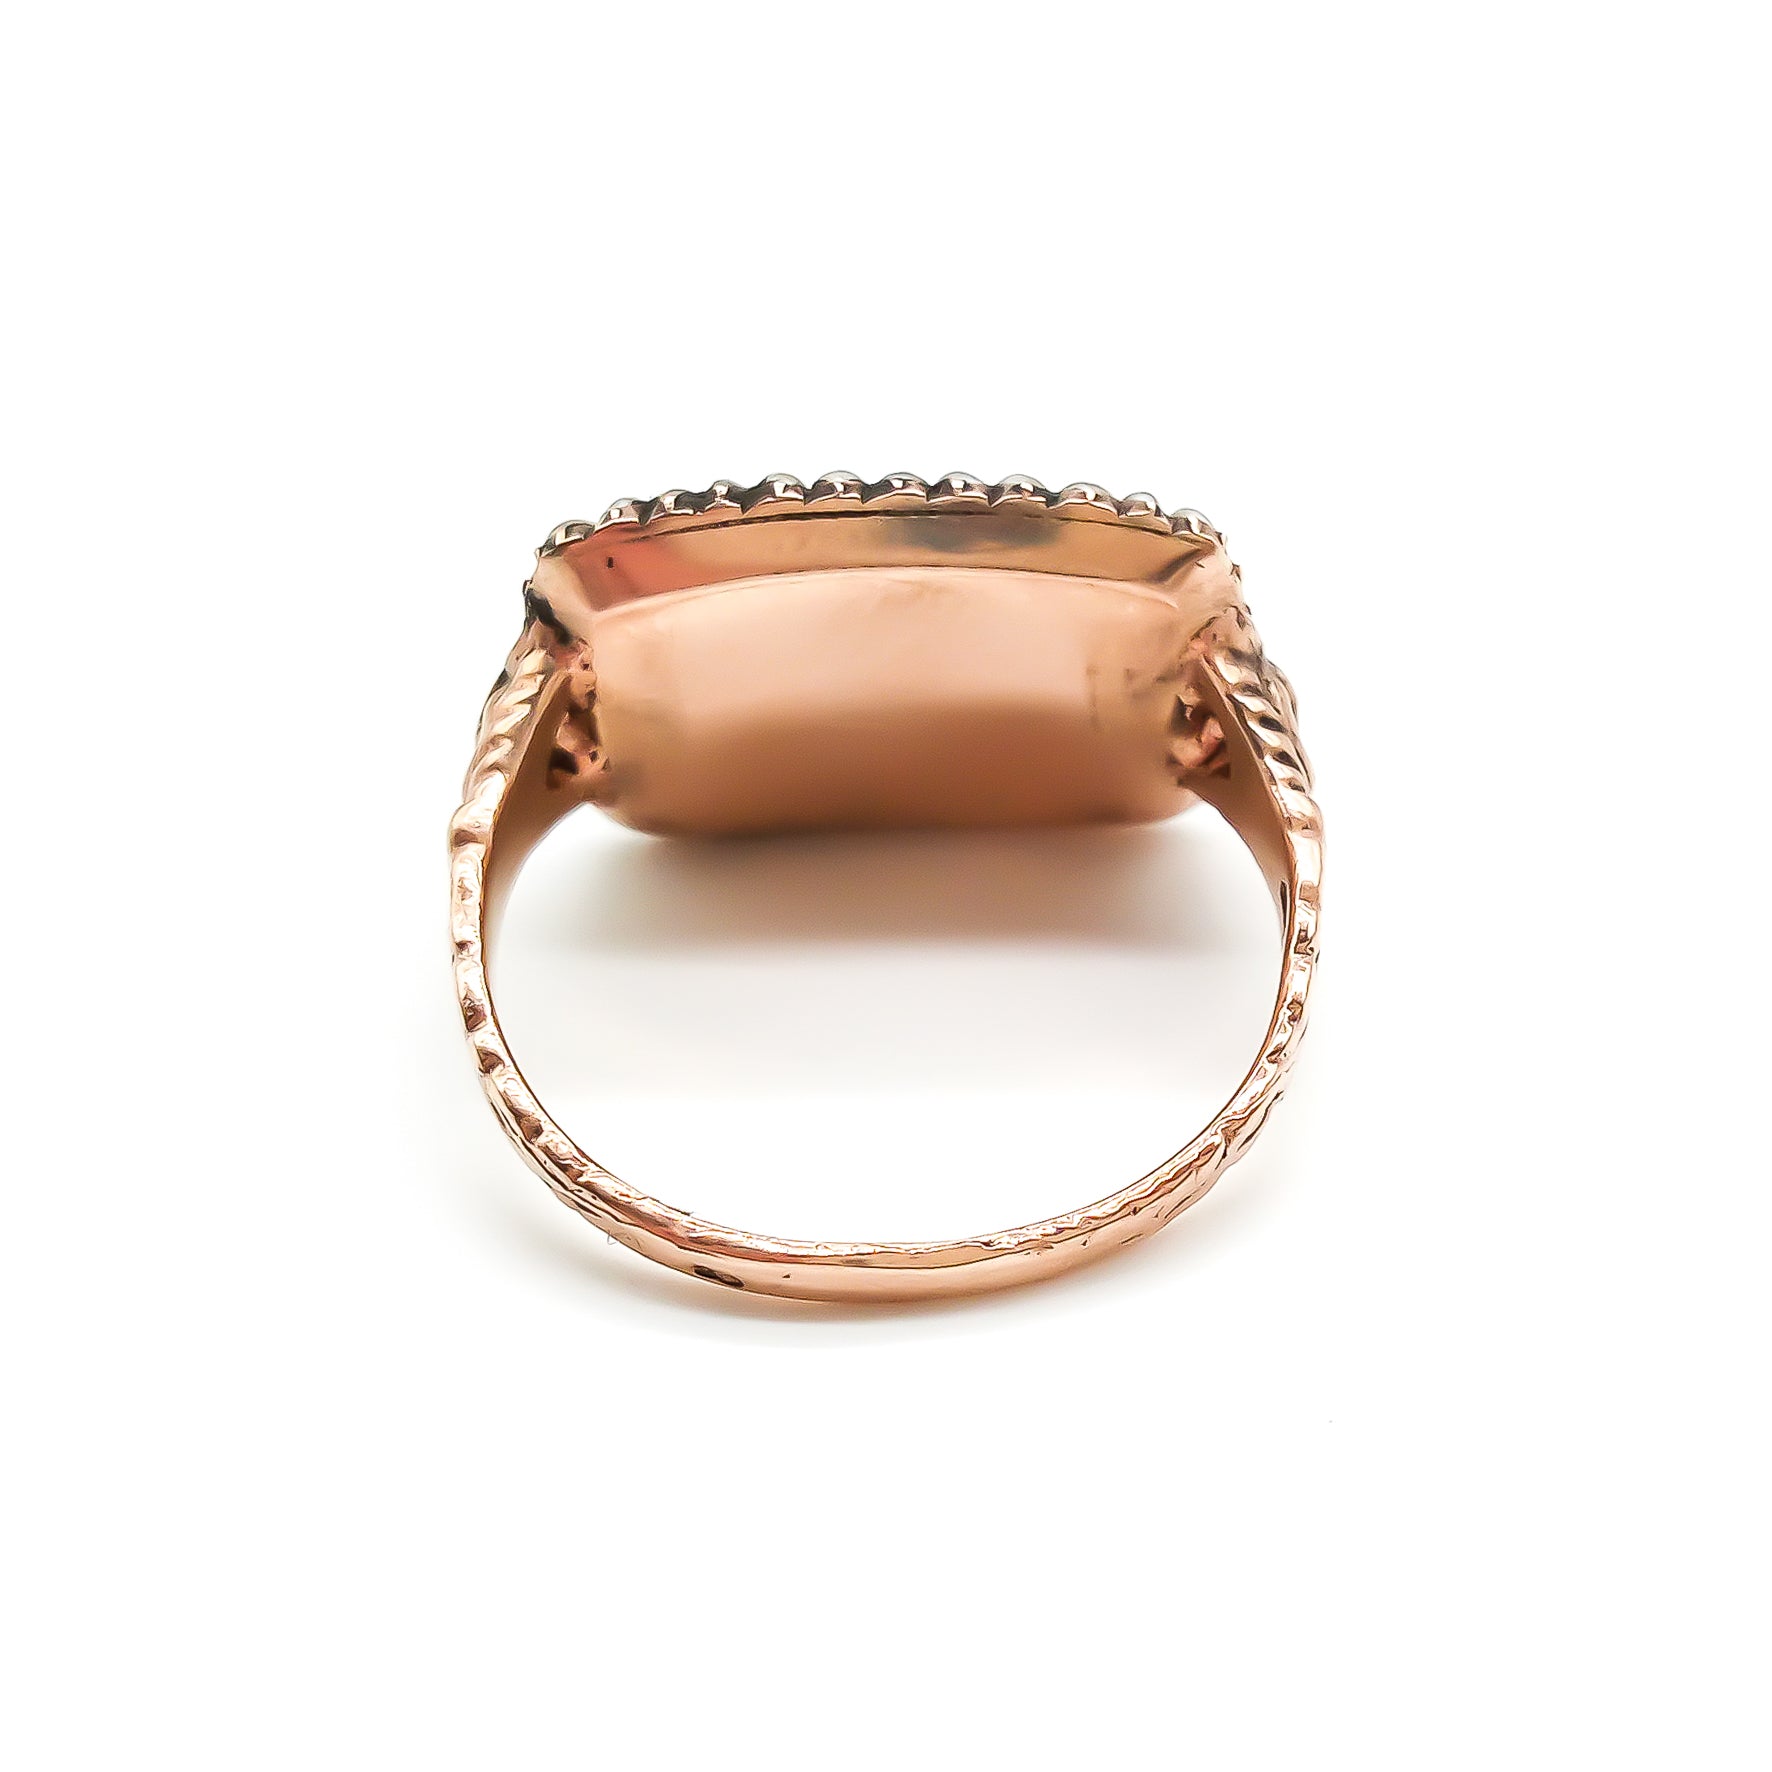 Beautifully crafted Georgian mourning ring in a 9ct rose gold setting with plaited hair under domed glass, adorned with tiny seed pearls. Later shank.